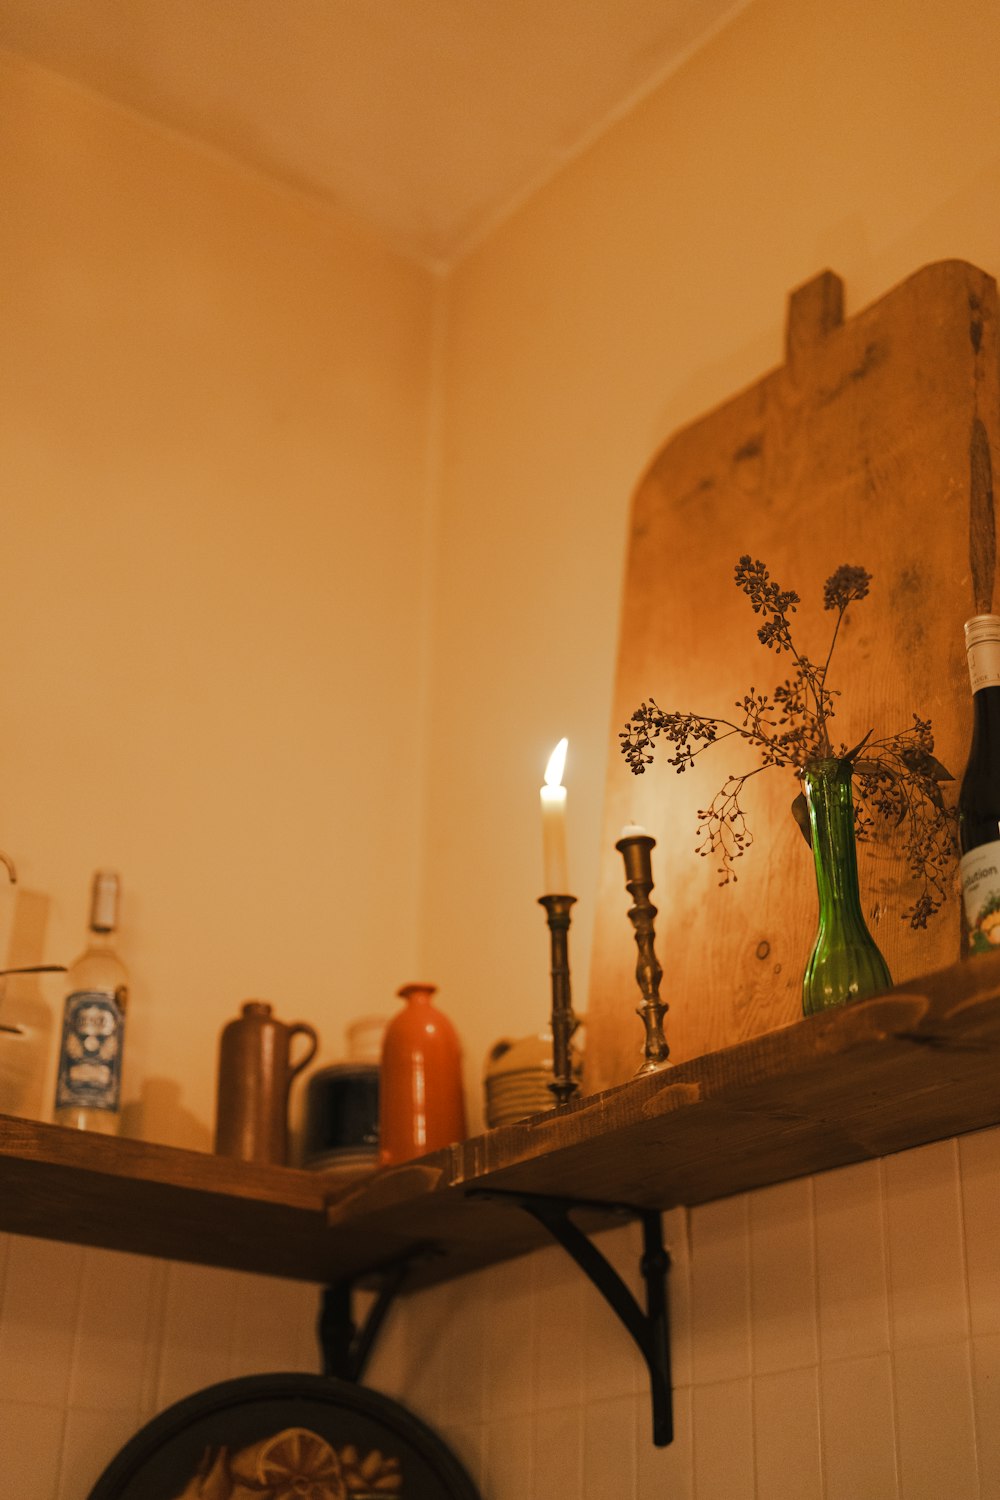 a shelf with candles, bottles, and other items on it